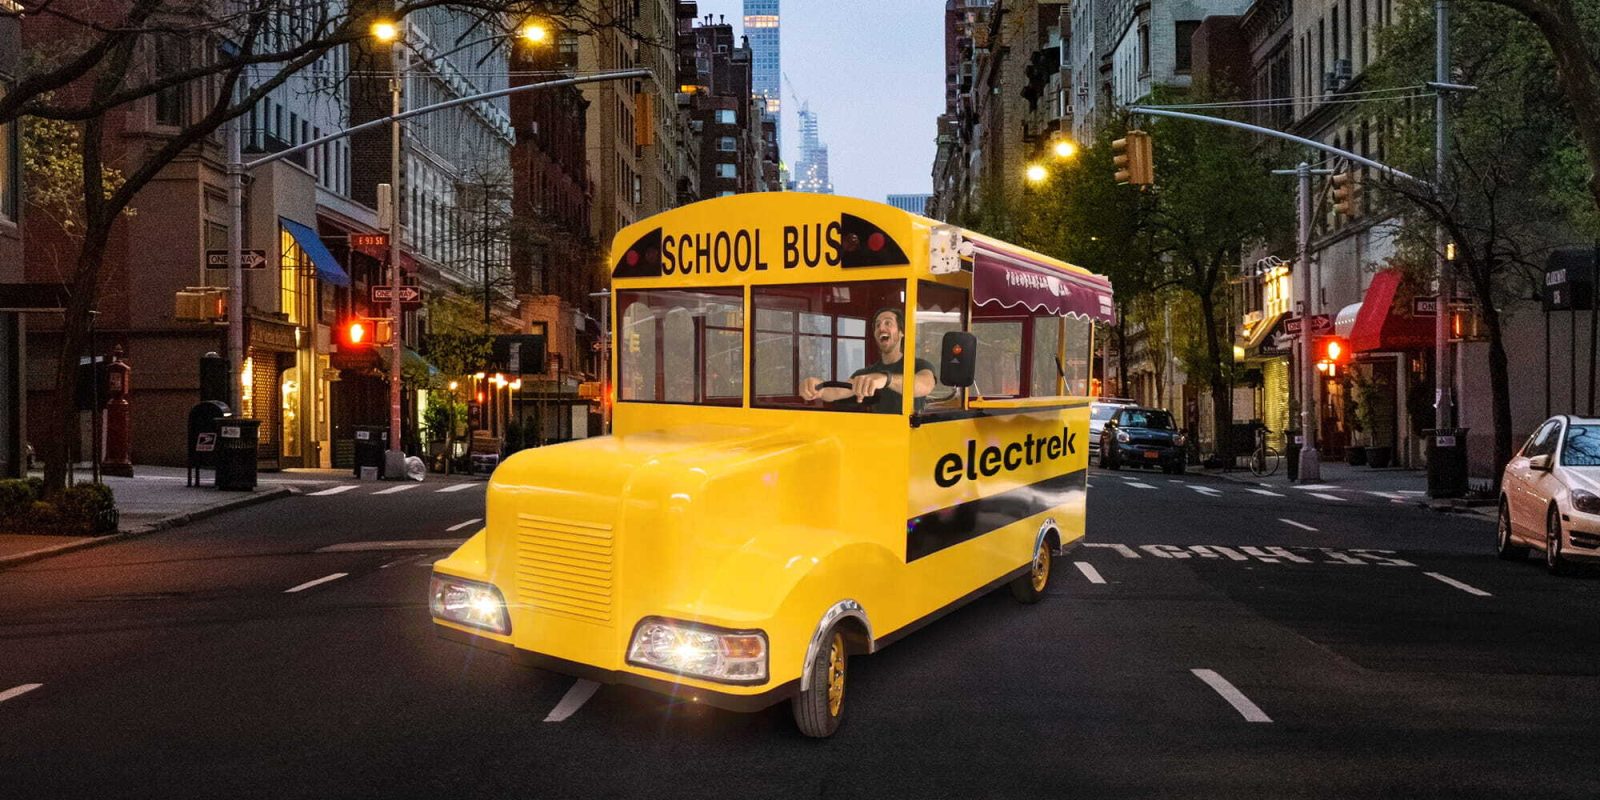 photo of Weird Alibaba: Anyone want a $2,000 school bus-shaped electric food truck from China? image